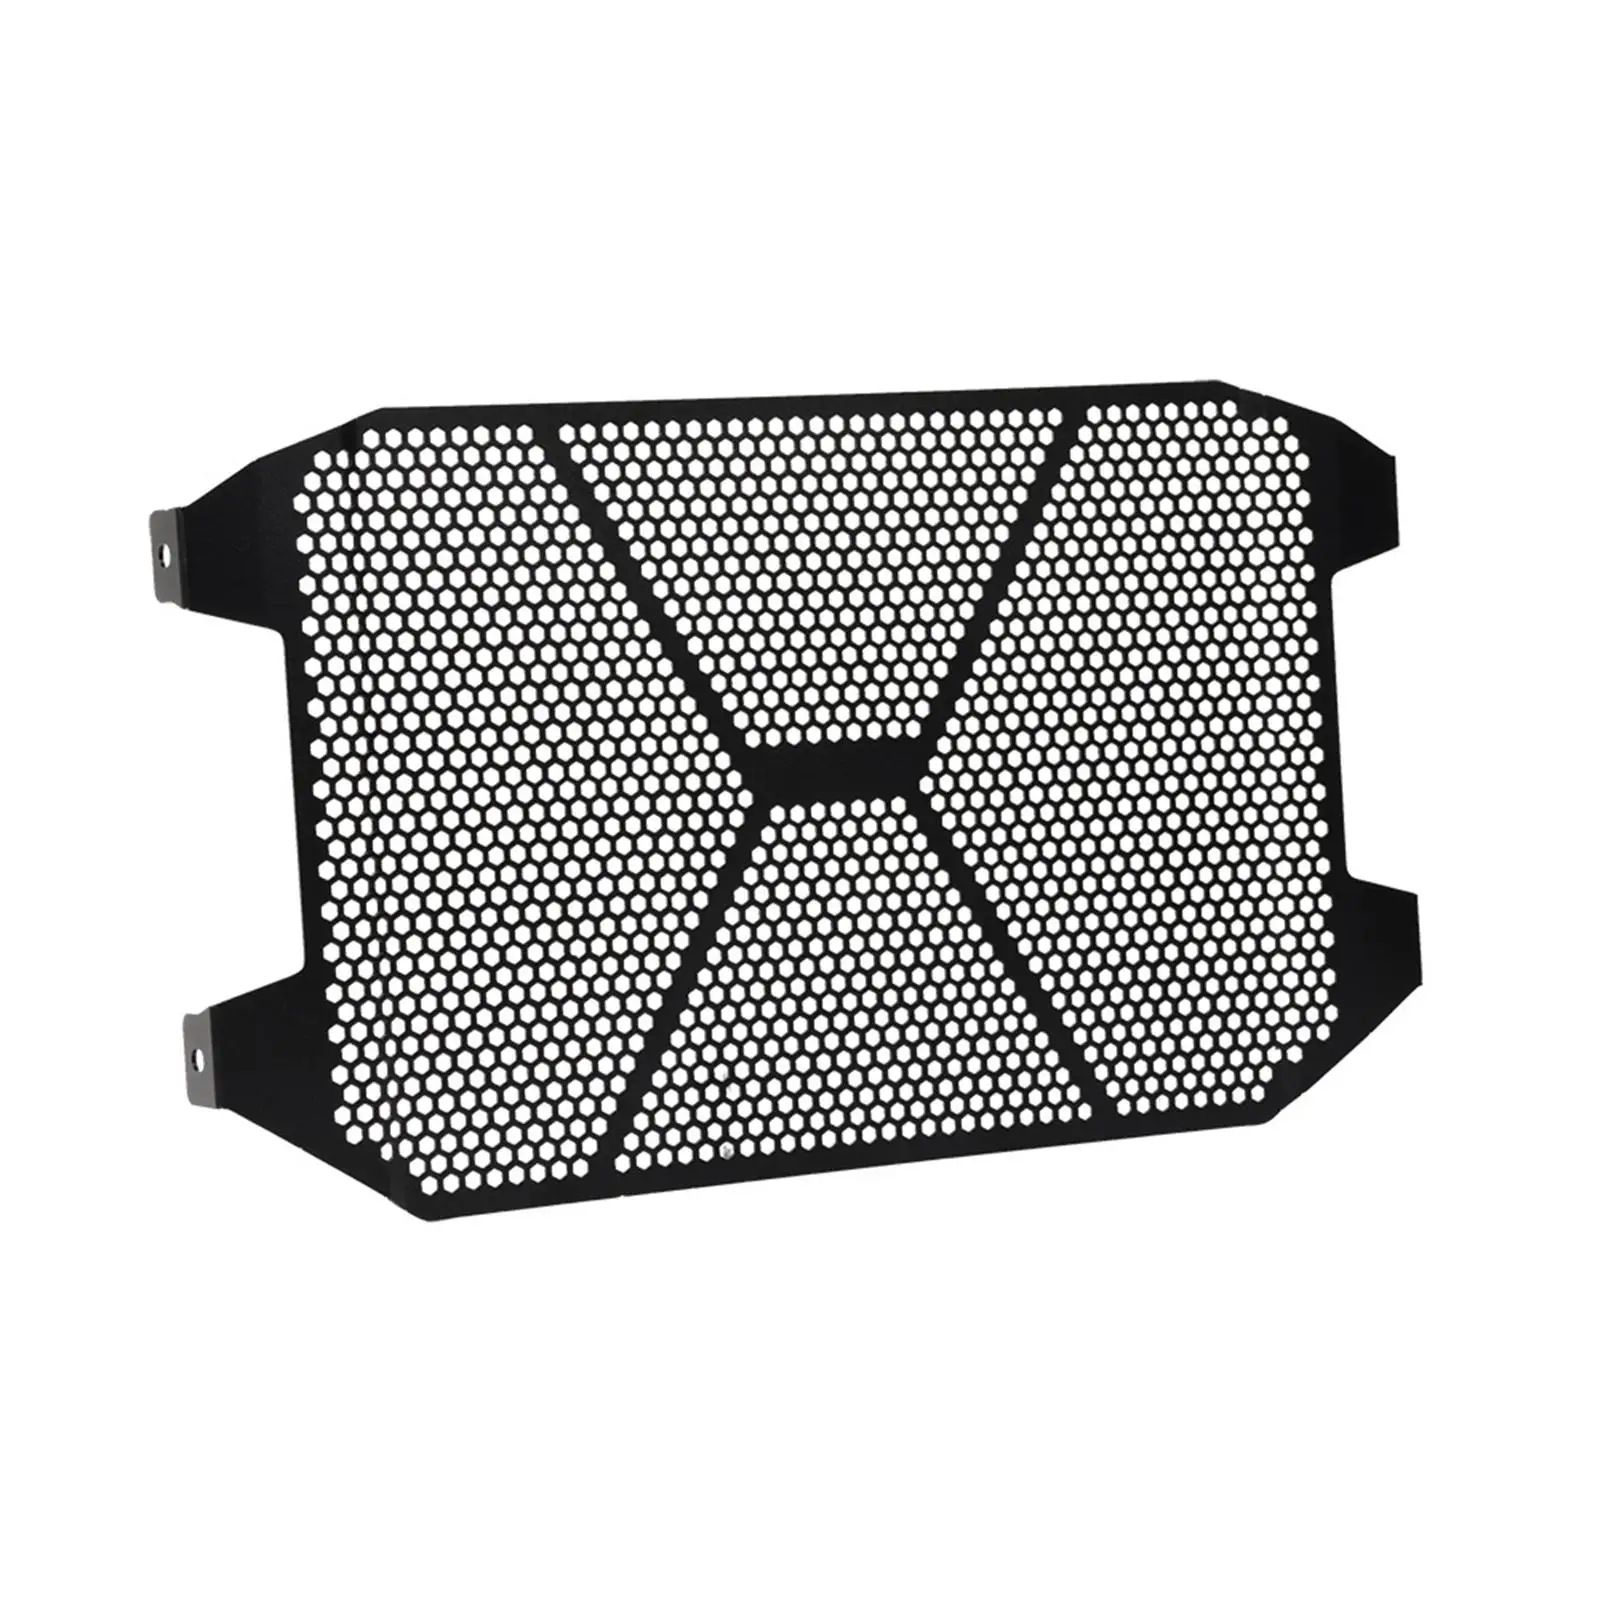 Radiator Grille Guard Cover Protector Assembly Replaces for Triumph